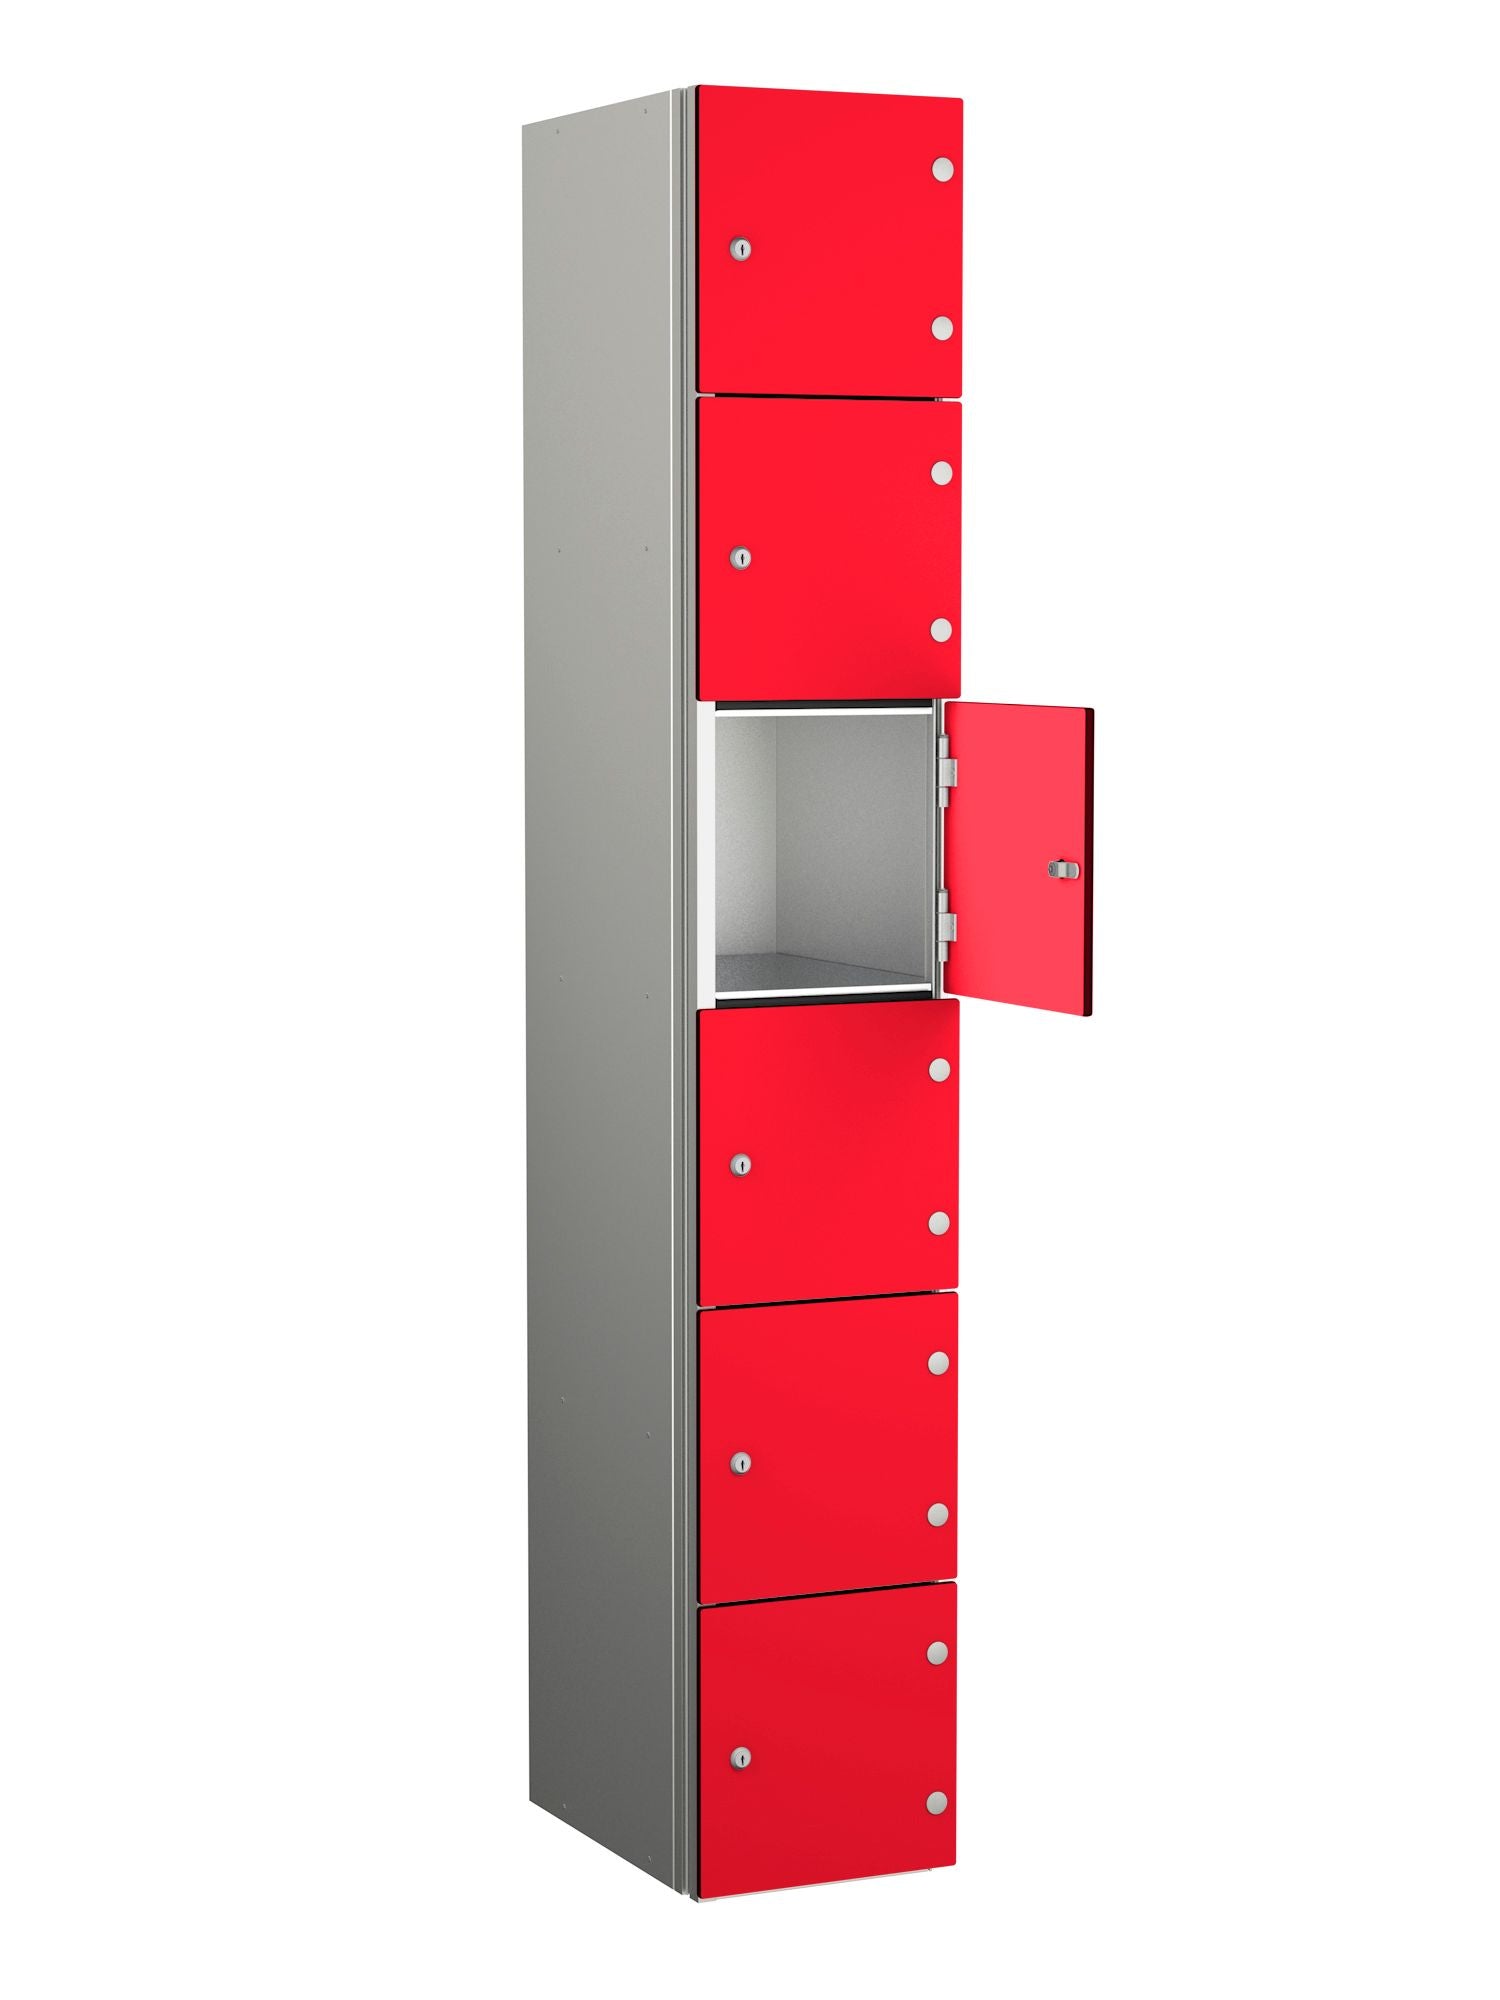 ZENBOX WET AREA LOCKERS WITH SGL DOORS - DYNASTY RED 6 DOOR Storage Lockers > Lockers > Cabinets > Storage > Probe > One Stop For Safety   